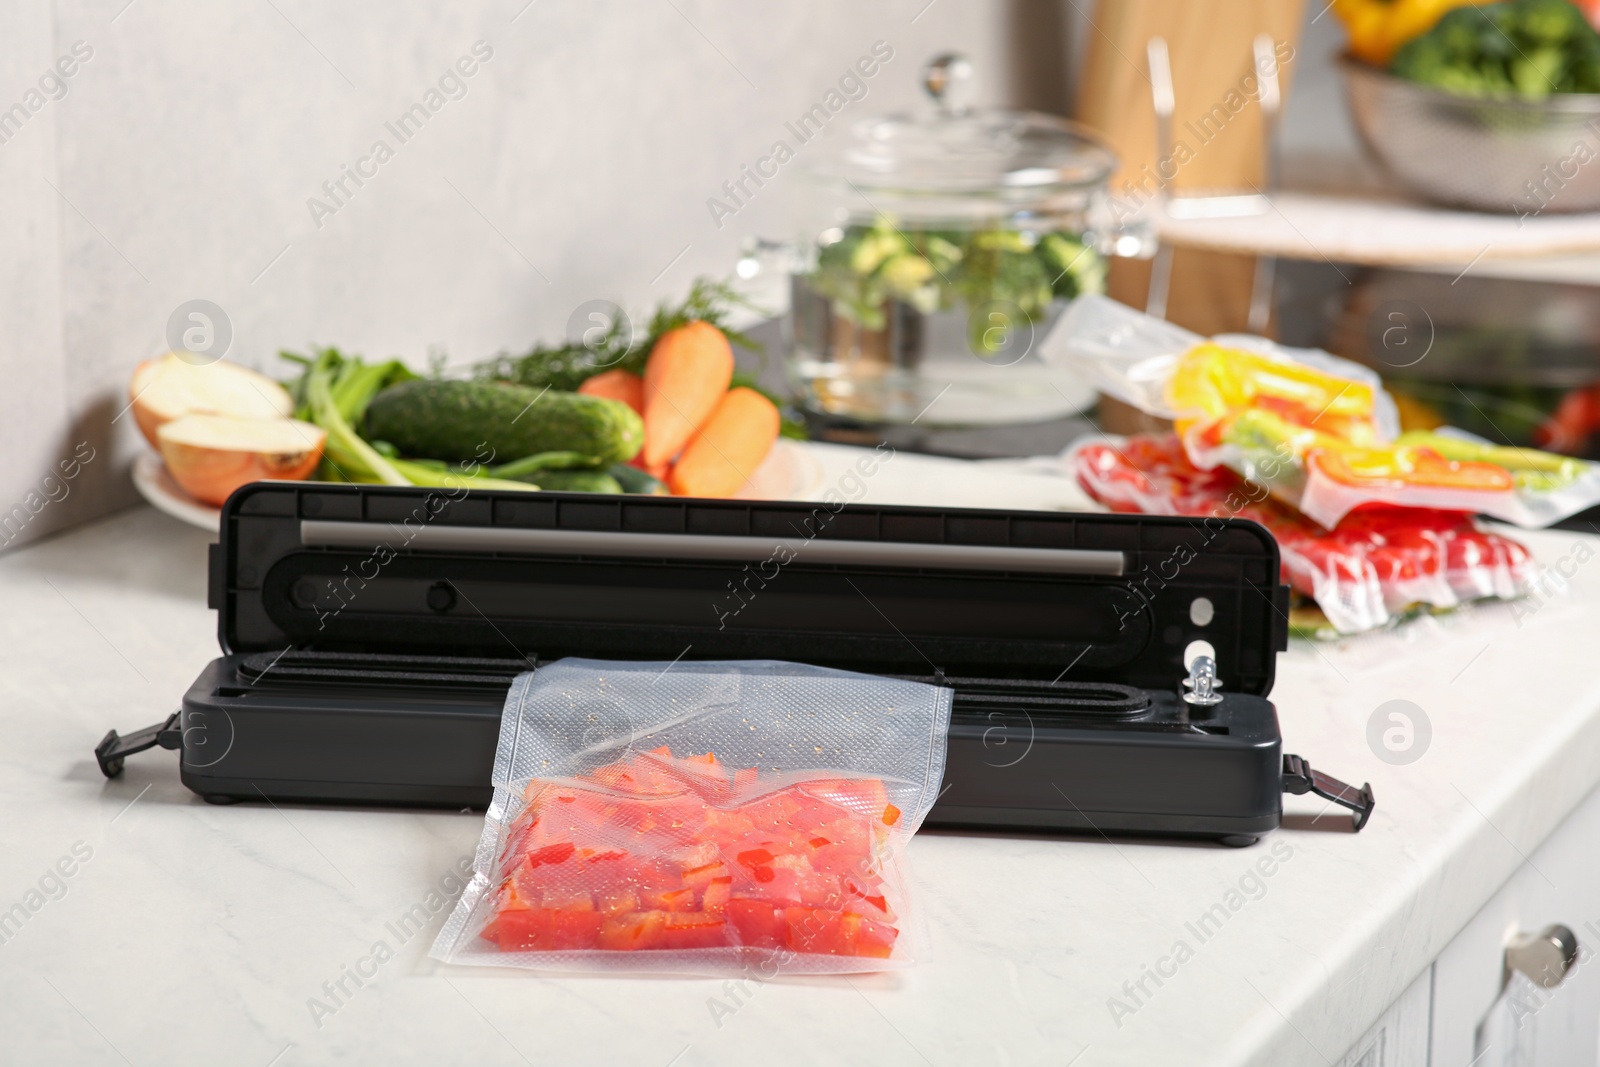 Photo of Sealer for vacuum packing with red pepper in plastic bag on white table indoors